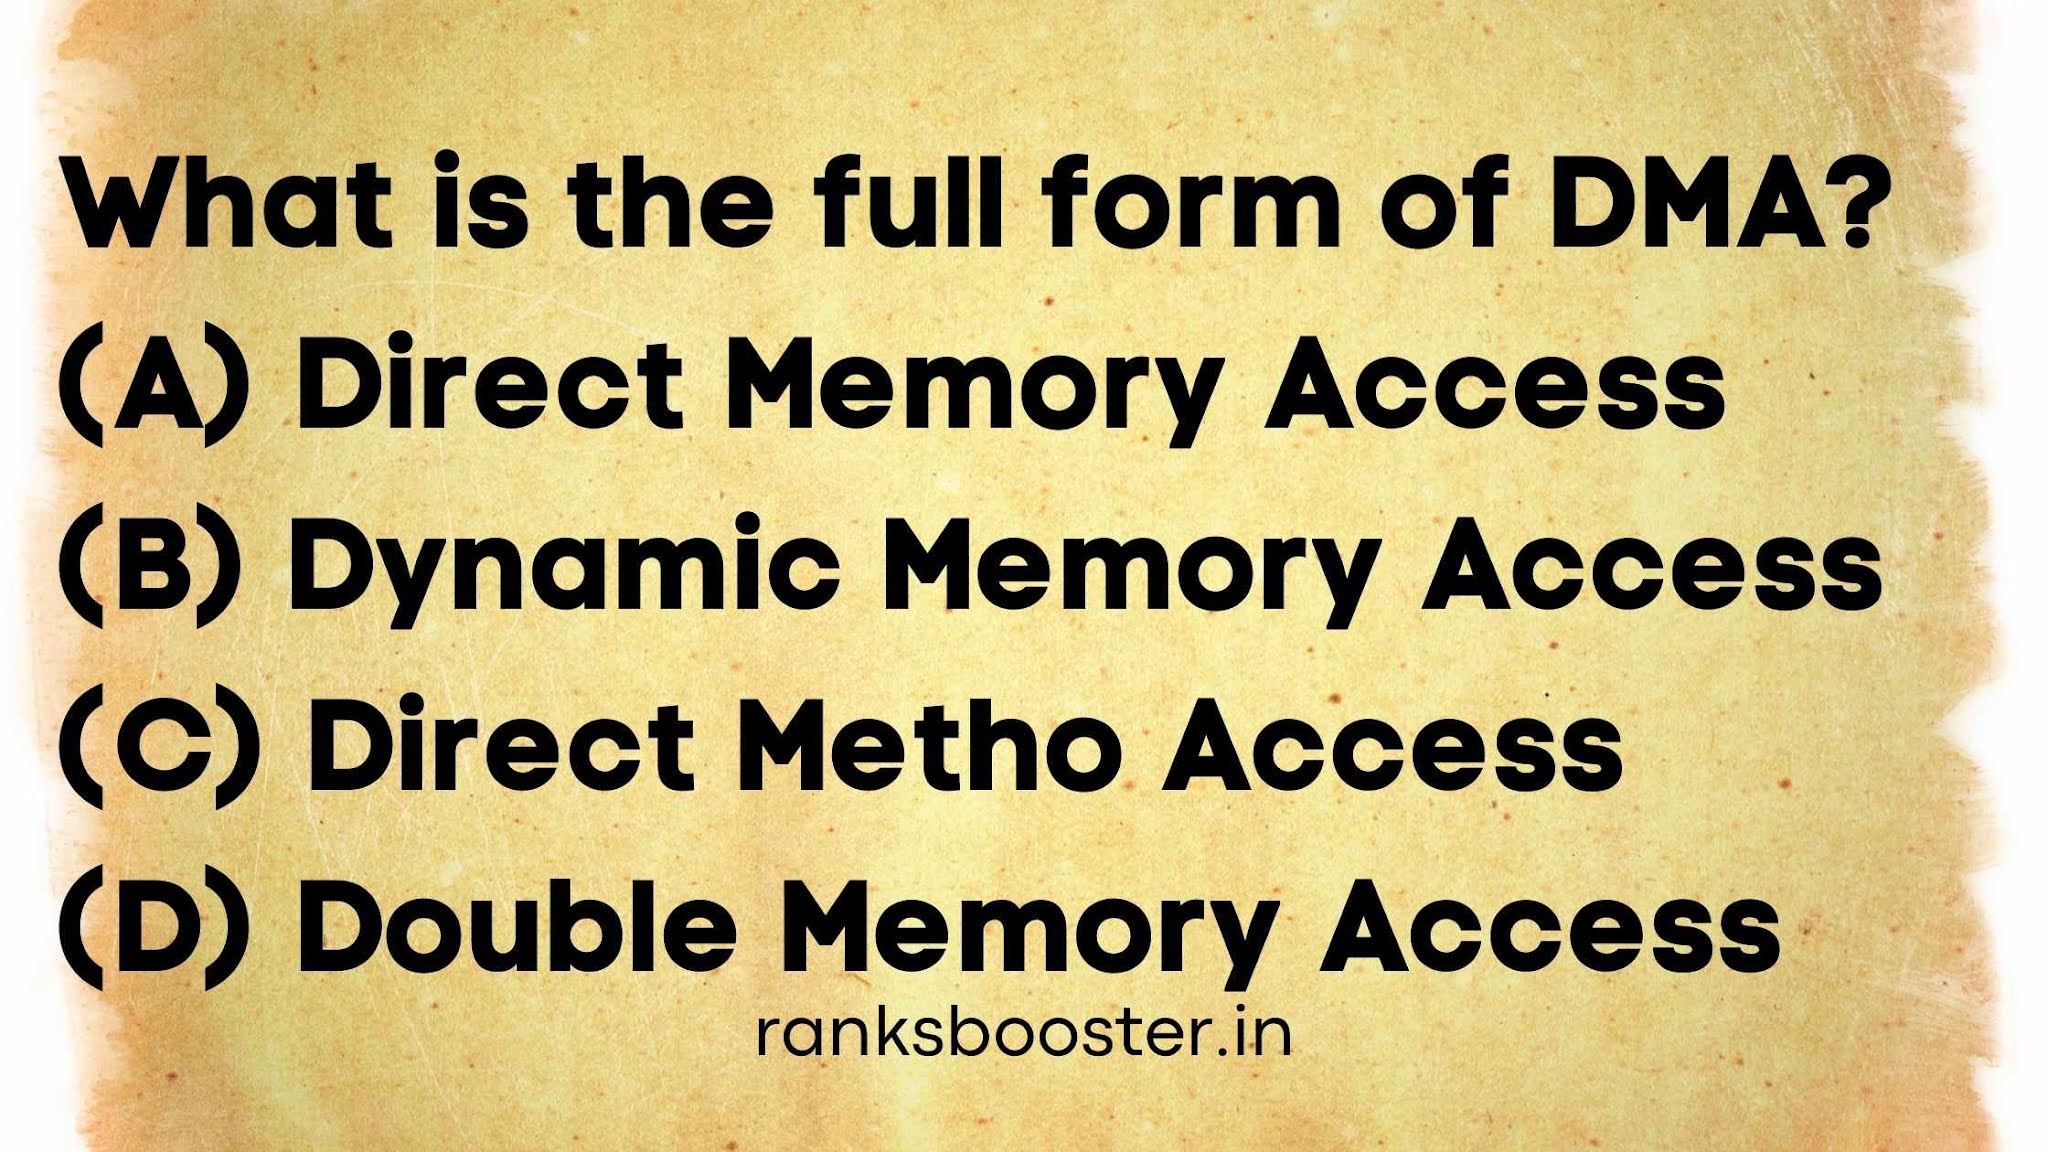 What is the full form of DMA? (A) Direct Memory Access (B) Dynamic Memory Access (C) Direct Method Access (D) Double Memory Access